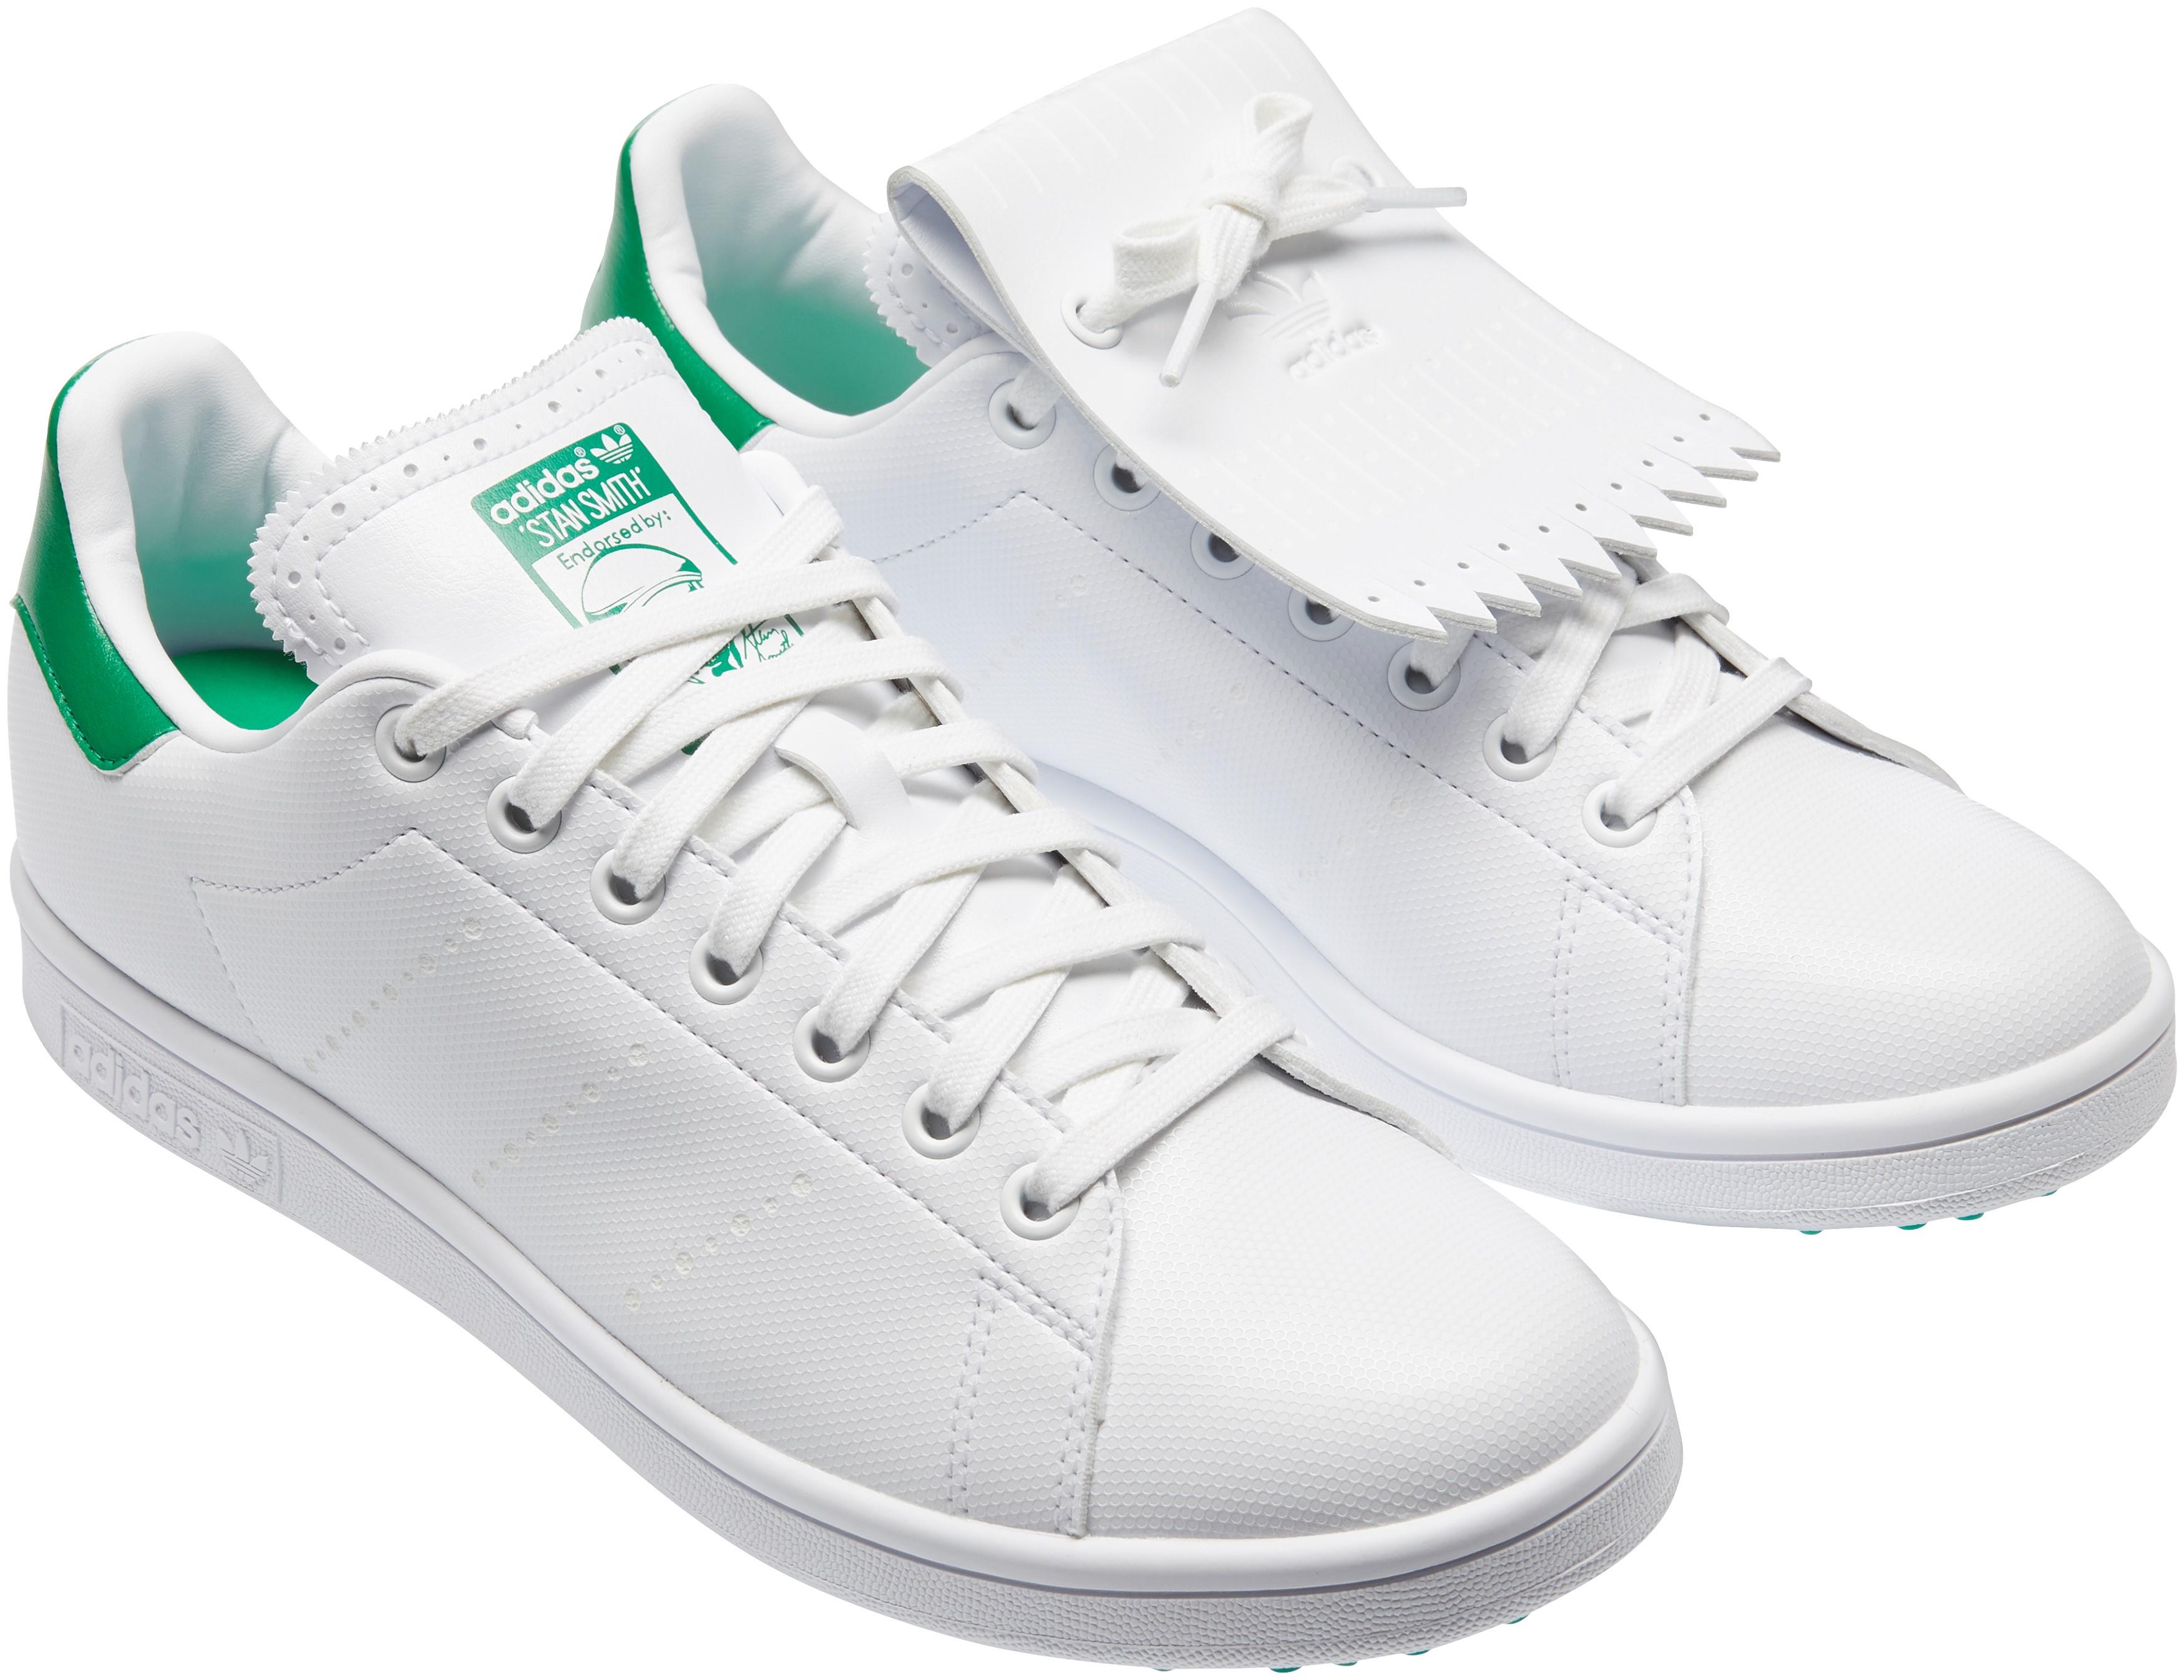 ADIDAS STAN SMITH PRIMEGREEN LIMITED EDITION SPIKELESS